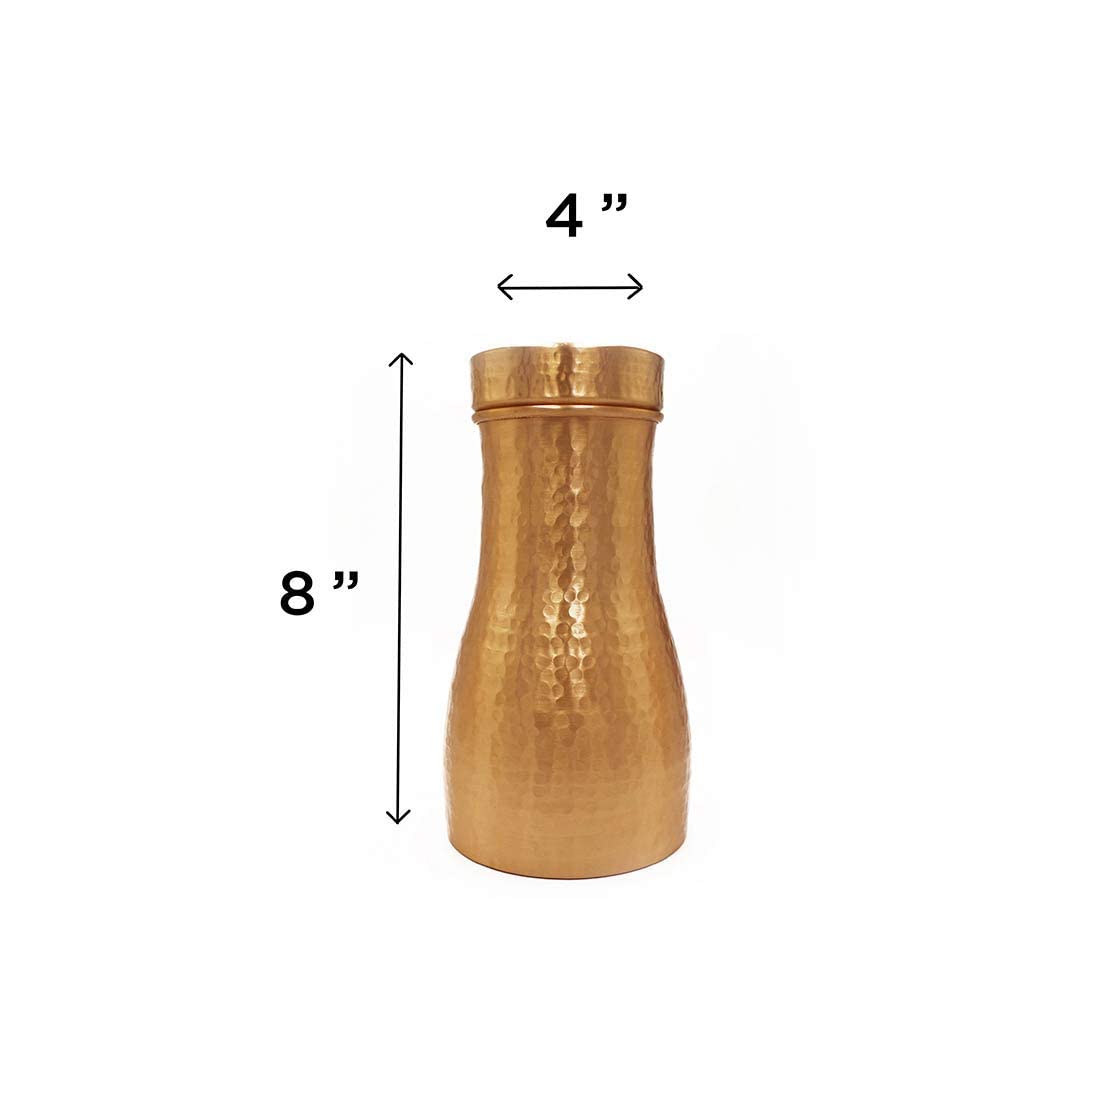 De Kulture Hammered Pure Copper Carafe Pitcher With Cap, Ideal Drinkware With Ayurveda and Yoga Benefits, 4 x 8 Inches (DH), 1 litre